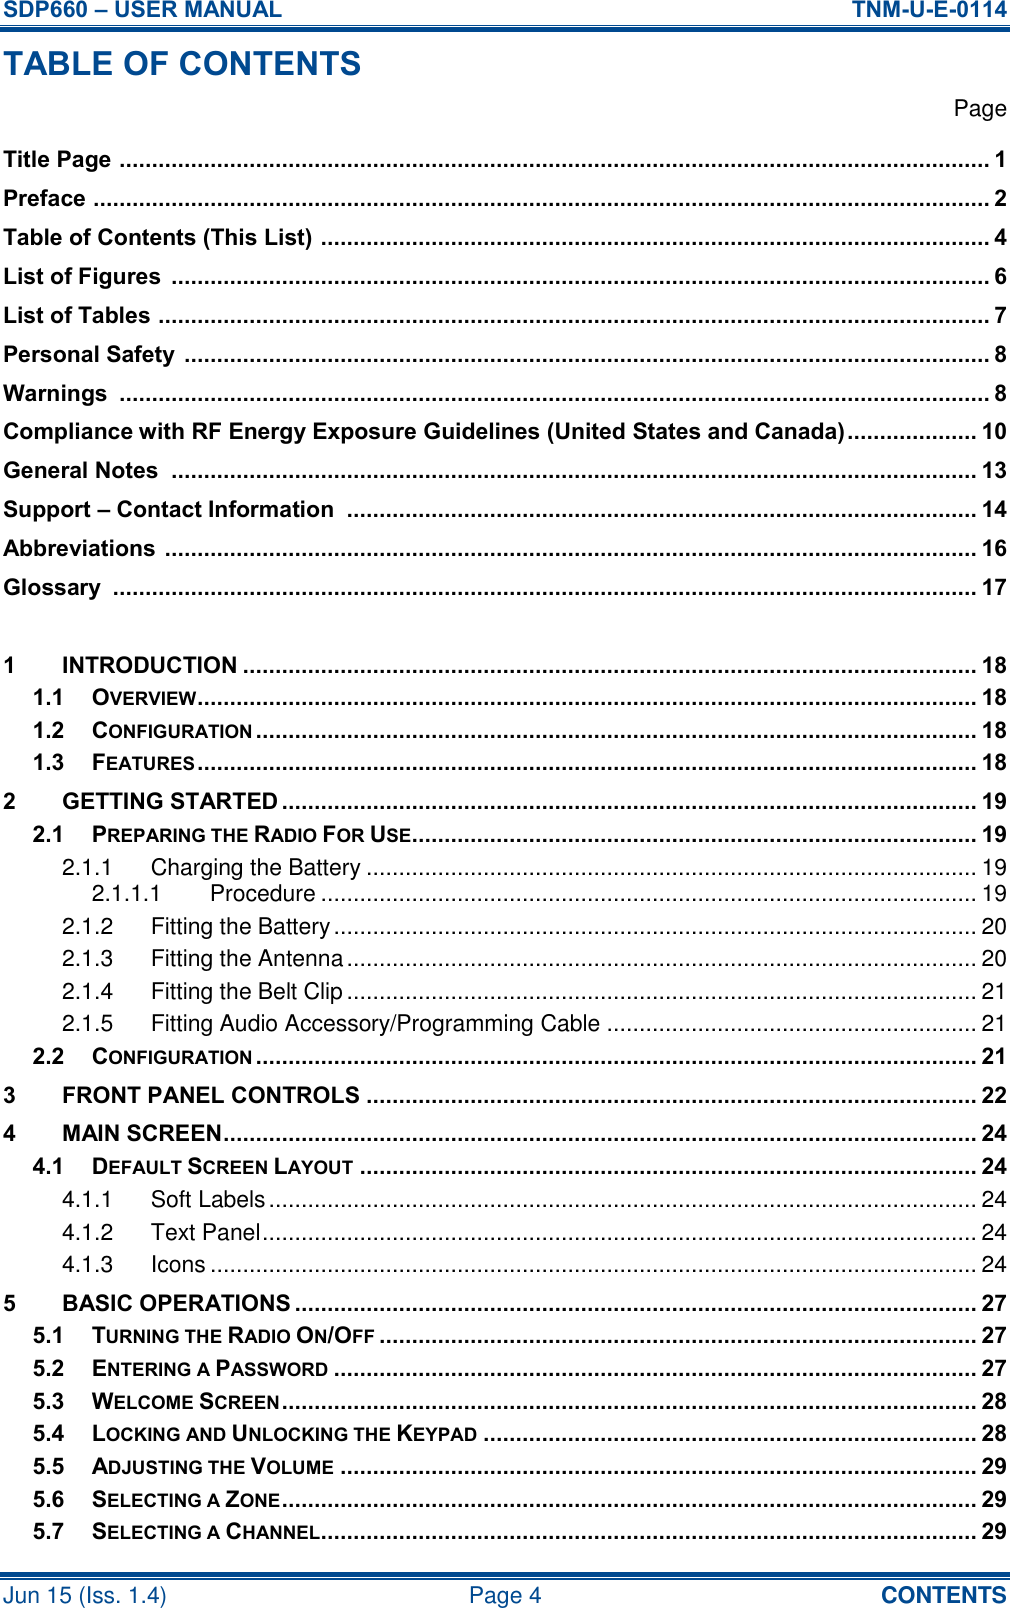 SDP660 – USER MANUAL  TNM-U-E-0114 Jun 15 (Iss. 1.4)  Page 4  CONTENTS TABLE OF CONTENTS   Page Title Page  ...................................................................................................................................... 1 Preface  .......................................................................................................................................... 2 Table of Contents (This List)  ....................................................................................................... 4 List of Figures  .............................................................................................................................. 6 List of Tables  ................................................................................................................................ 7 Personal Safety  ............................................................................................................................ 8 Warnings  ...................................................................................................................................... 8 Compliance with RF Energy Exposure Guidelines (United States and Canada) .................... 10 General Notes  ............................................................................................................................ 13 Support – Contact Information  ................................................................................................. 14 Abbreviations  ............................................................................................................................. 16 Glossary  ..................................................................................................................................... 17  1 INTRODUCTION ................................................................................................................. 18 1.1 OVERVIEW ........................................................................................................................ 18 1.2 CONFIGURATION ............................................................................................................... 18 1.3 FEATURES ........................................................................................................................ 18 2 GETTING STARTED ........................................................................................................... 19 2.1 PREPARING THE RADIO FOR USE....................................................................................... 19 2.1.1 Charging the Battery .............................................................................................. 19 2.1.1.1 Procedure ..................................................................................................... 19 2.1.2 Fitting the Battery ................................................................................................... 20 2.1.3 Fitting the Antenna ................................................................................................. 20 2.1.4 Fitting the Belt Clip ................................................................................................. 21 2.1.5 Fitting Audio Accessory/Programming Cable ......................................................... 21 2.2 CONFIGURATION ............................................................................................................... 21 3 FRONT PANEL CONTROLS .............................................................................................. 22 4 MAIN SCREEN .................................................................................................................... 24 4.1 DEFAULT SCREEN LAYOUT ............................................................................................... 24 4.1.1 Soft Labels ............................................................................................................. 24 4.1.2 Text Panel .............................................................................................................. 24 4.1.3 Icons ...................................................................................................................... 24 5 BASIC OPERATIONS ......................................................................................................... 27 5.1 TURNING THE RADIO ON/OFF ............................................................................................ 27 5.2 ENTERING A PASSWORD ................................................................................................... 27 5.3 WELCOME SCREEN ........................................................................................................... 28 5.4 LOCKING AND UNLOCKING THE KEYPAD ............................................................................ 28 5.5 ADJUSTING THE VOLUME .................................................................................................. 29 5.6 SELECTING A ZONE ........................................................................................................... 29 5.7 SELECTING A CHANNEL..................................................................................................... 29 